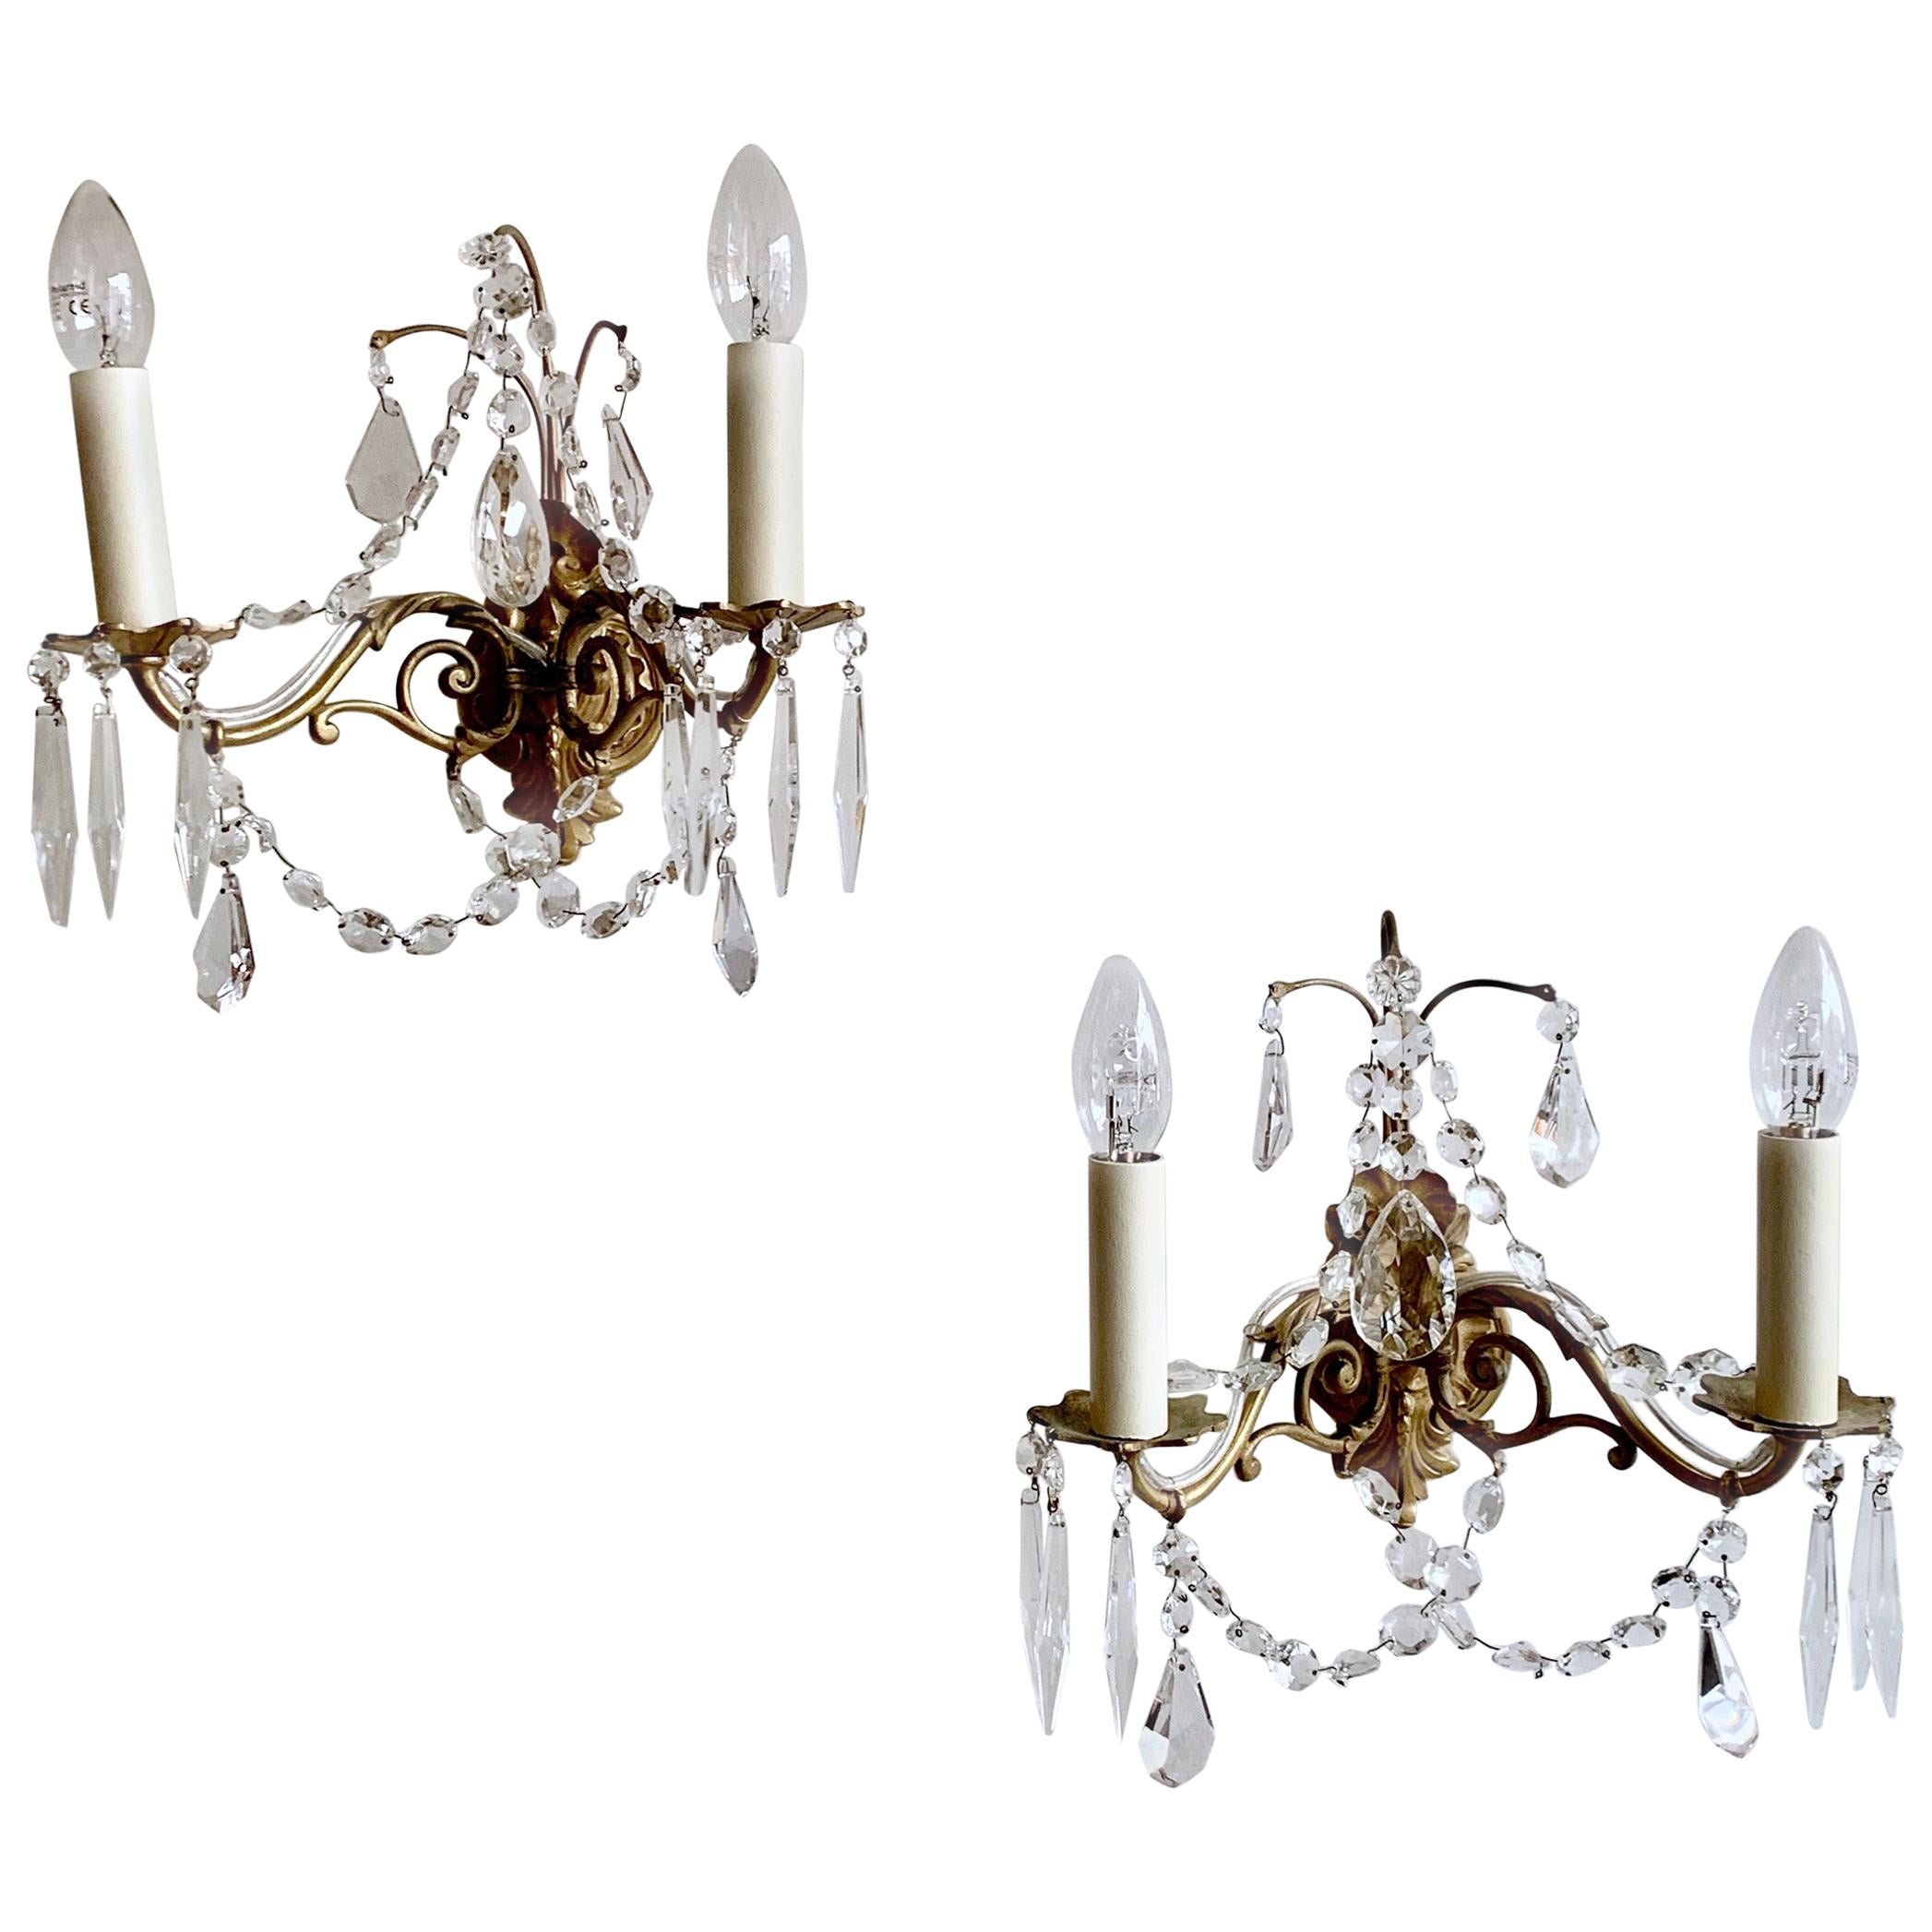 Pair of French Gilded Ornate Lamp Brass Wall Lights with Crystal Swag Drops